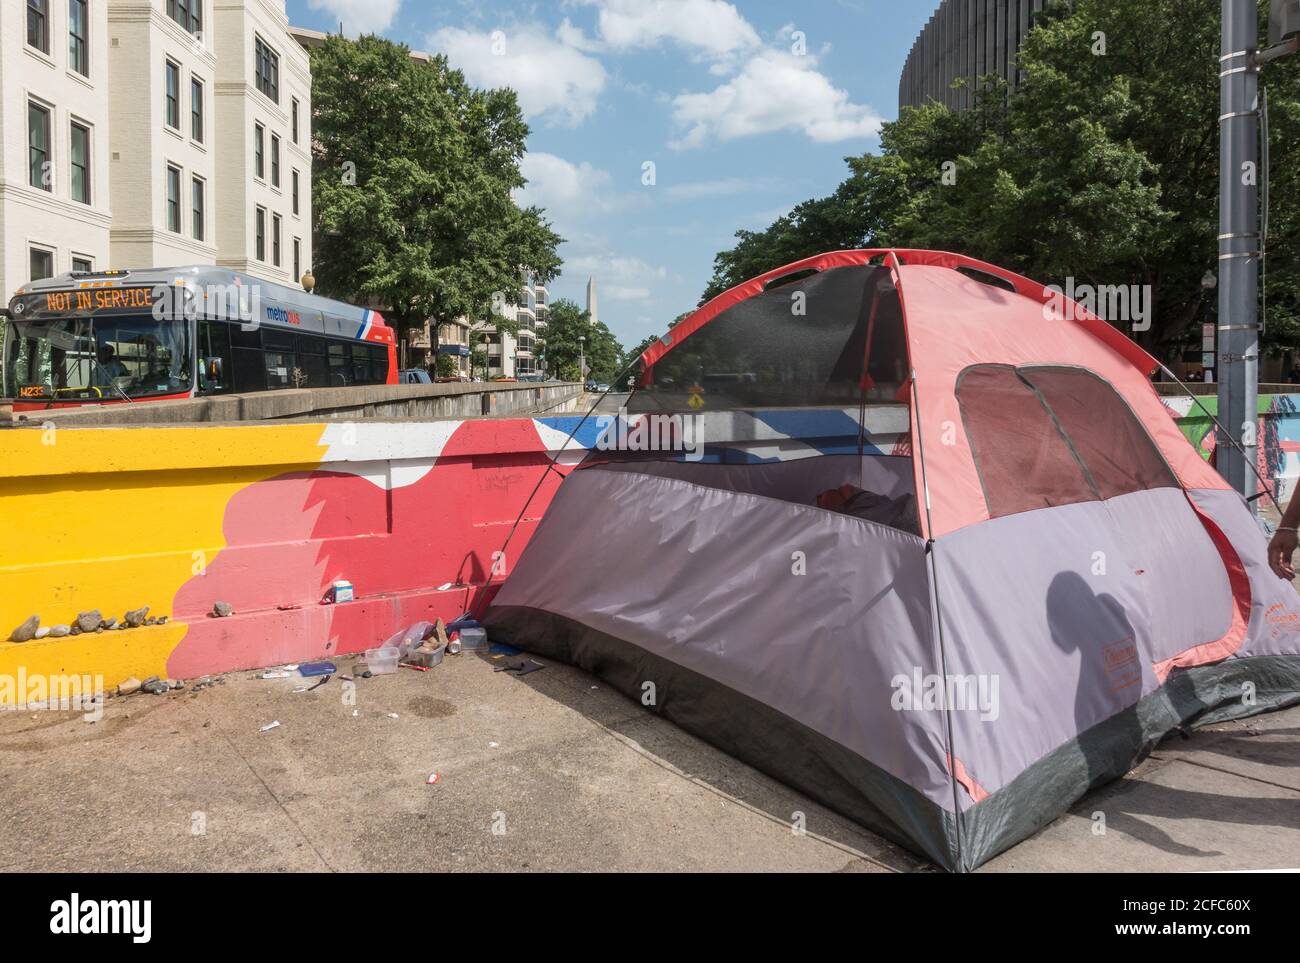 Homeless tent in Washington, DC with Washington Monument in distance. Stock Photo